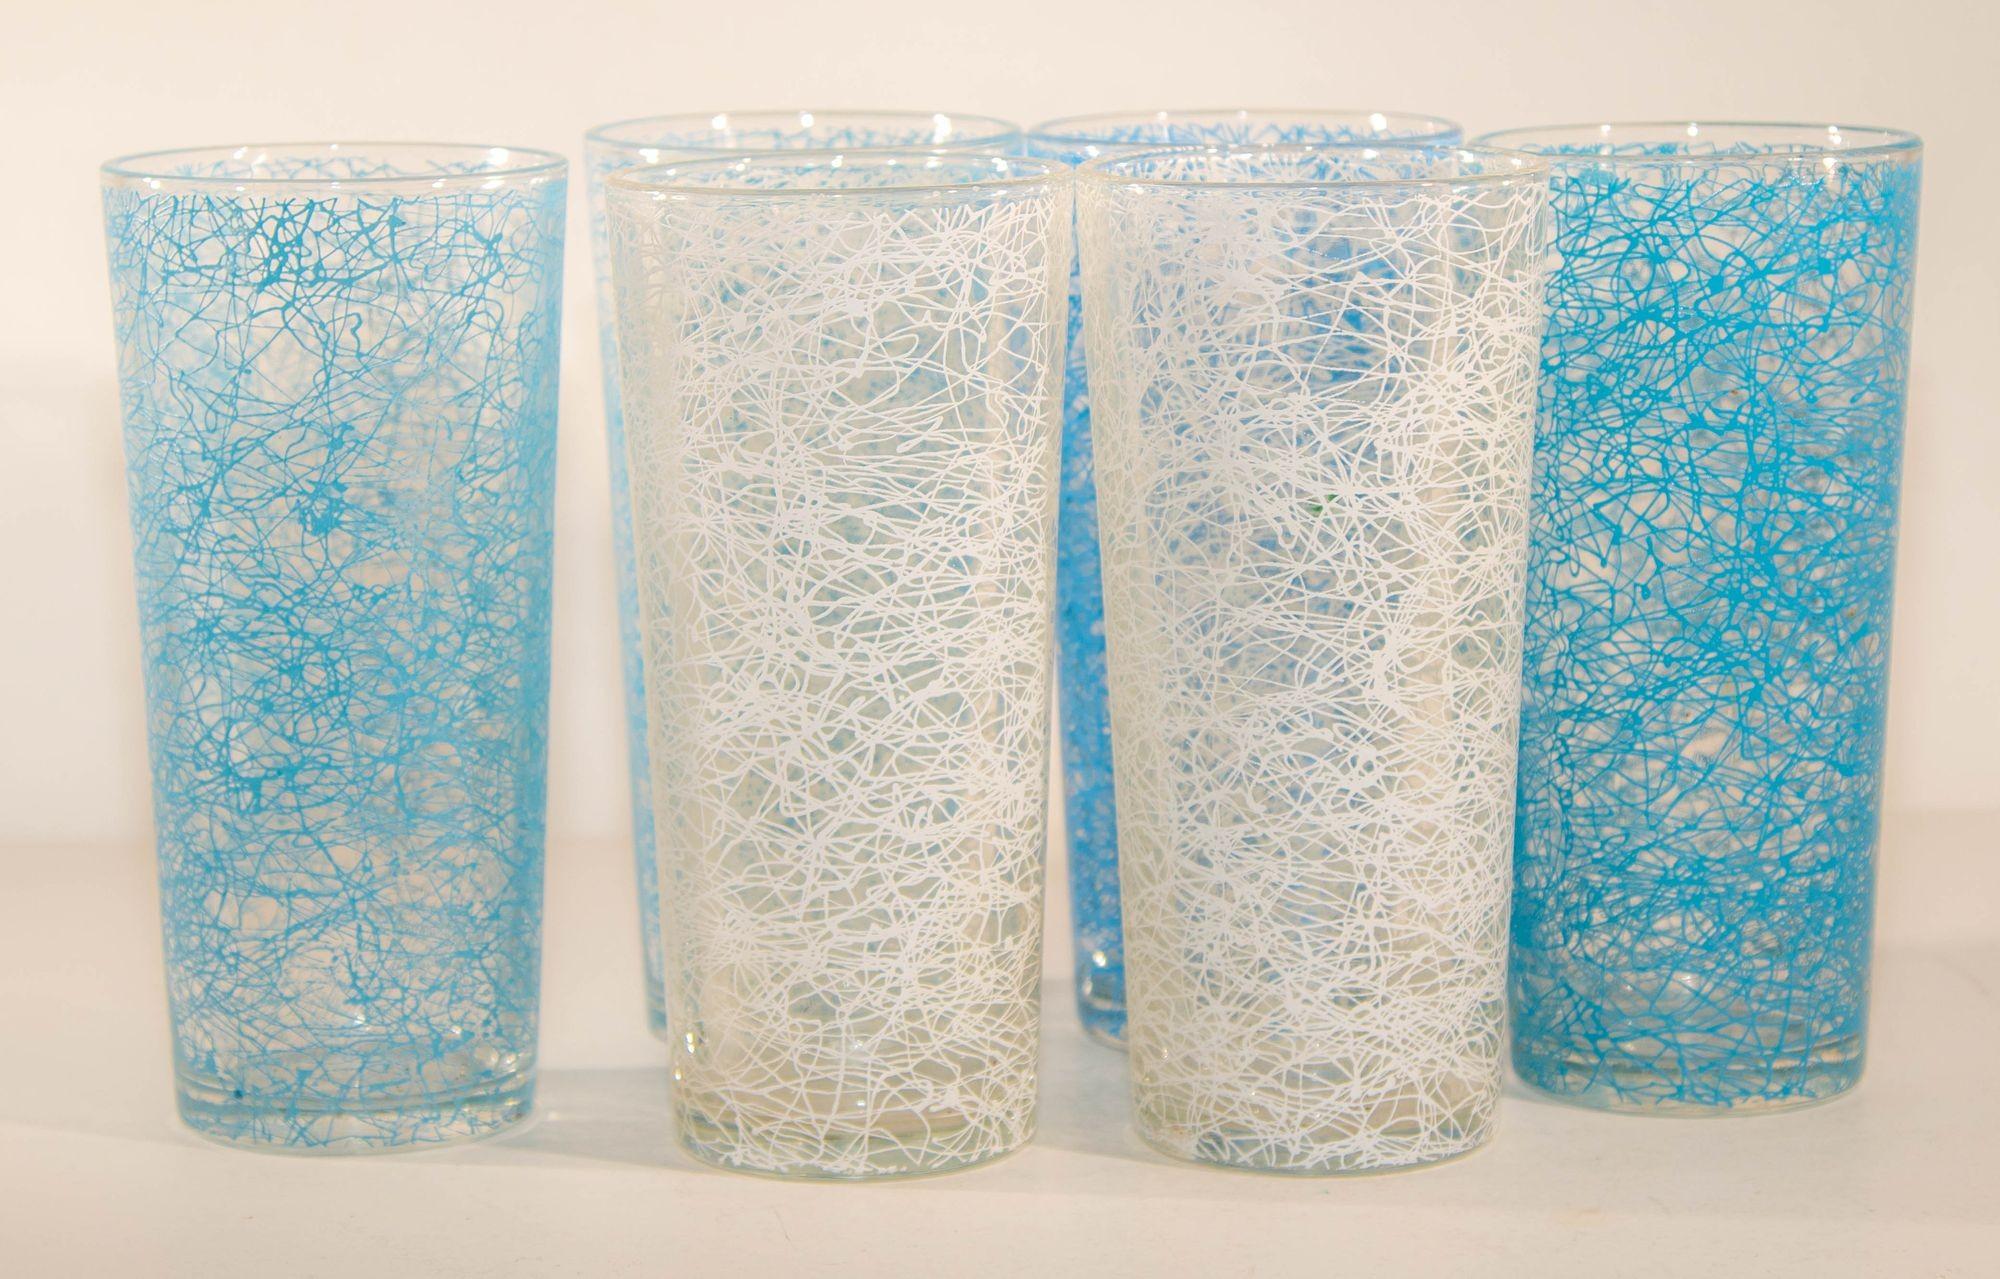 Set of three vintage clectible retro spaghetti string tumblers. Set includes 6 highball vintage white and powder blue spaghetti drizzle drinking glasses. Fantastic midcentury set of 6, barware, glassware, midcentury, circa 1950s-1960s. Cor craft